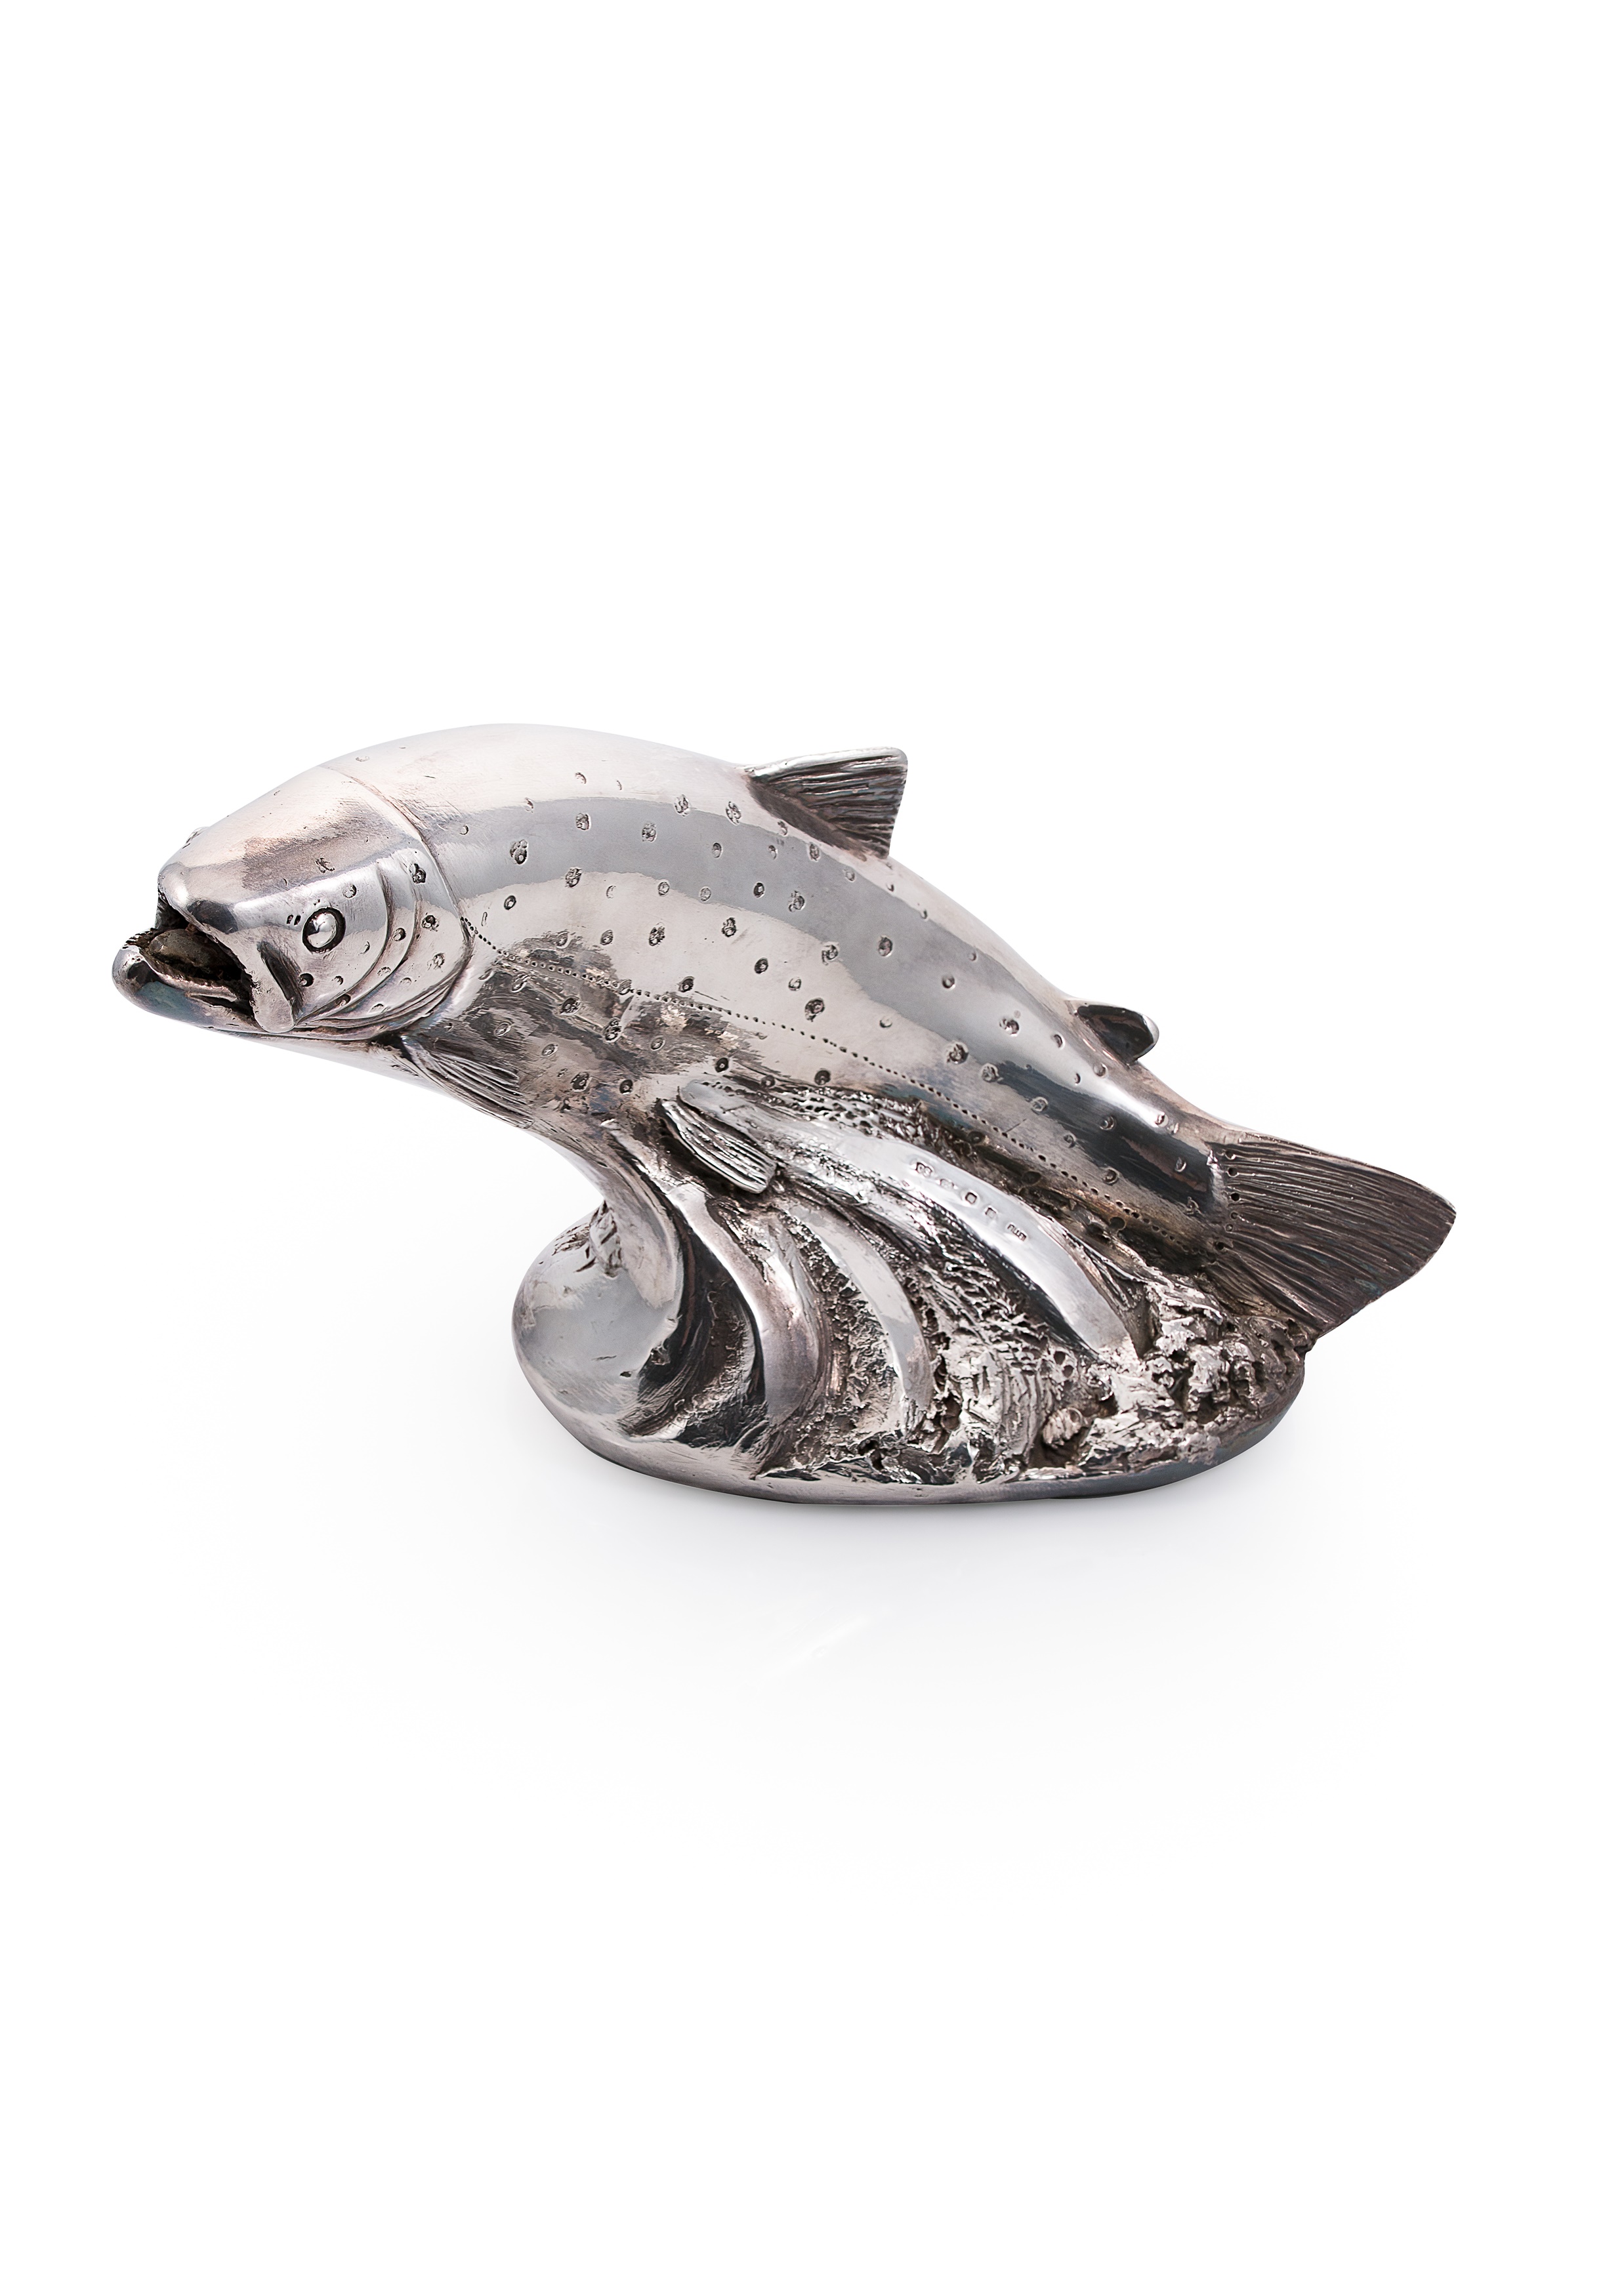 A modern and realistic silver model of a leaping salmon,